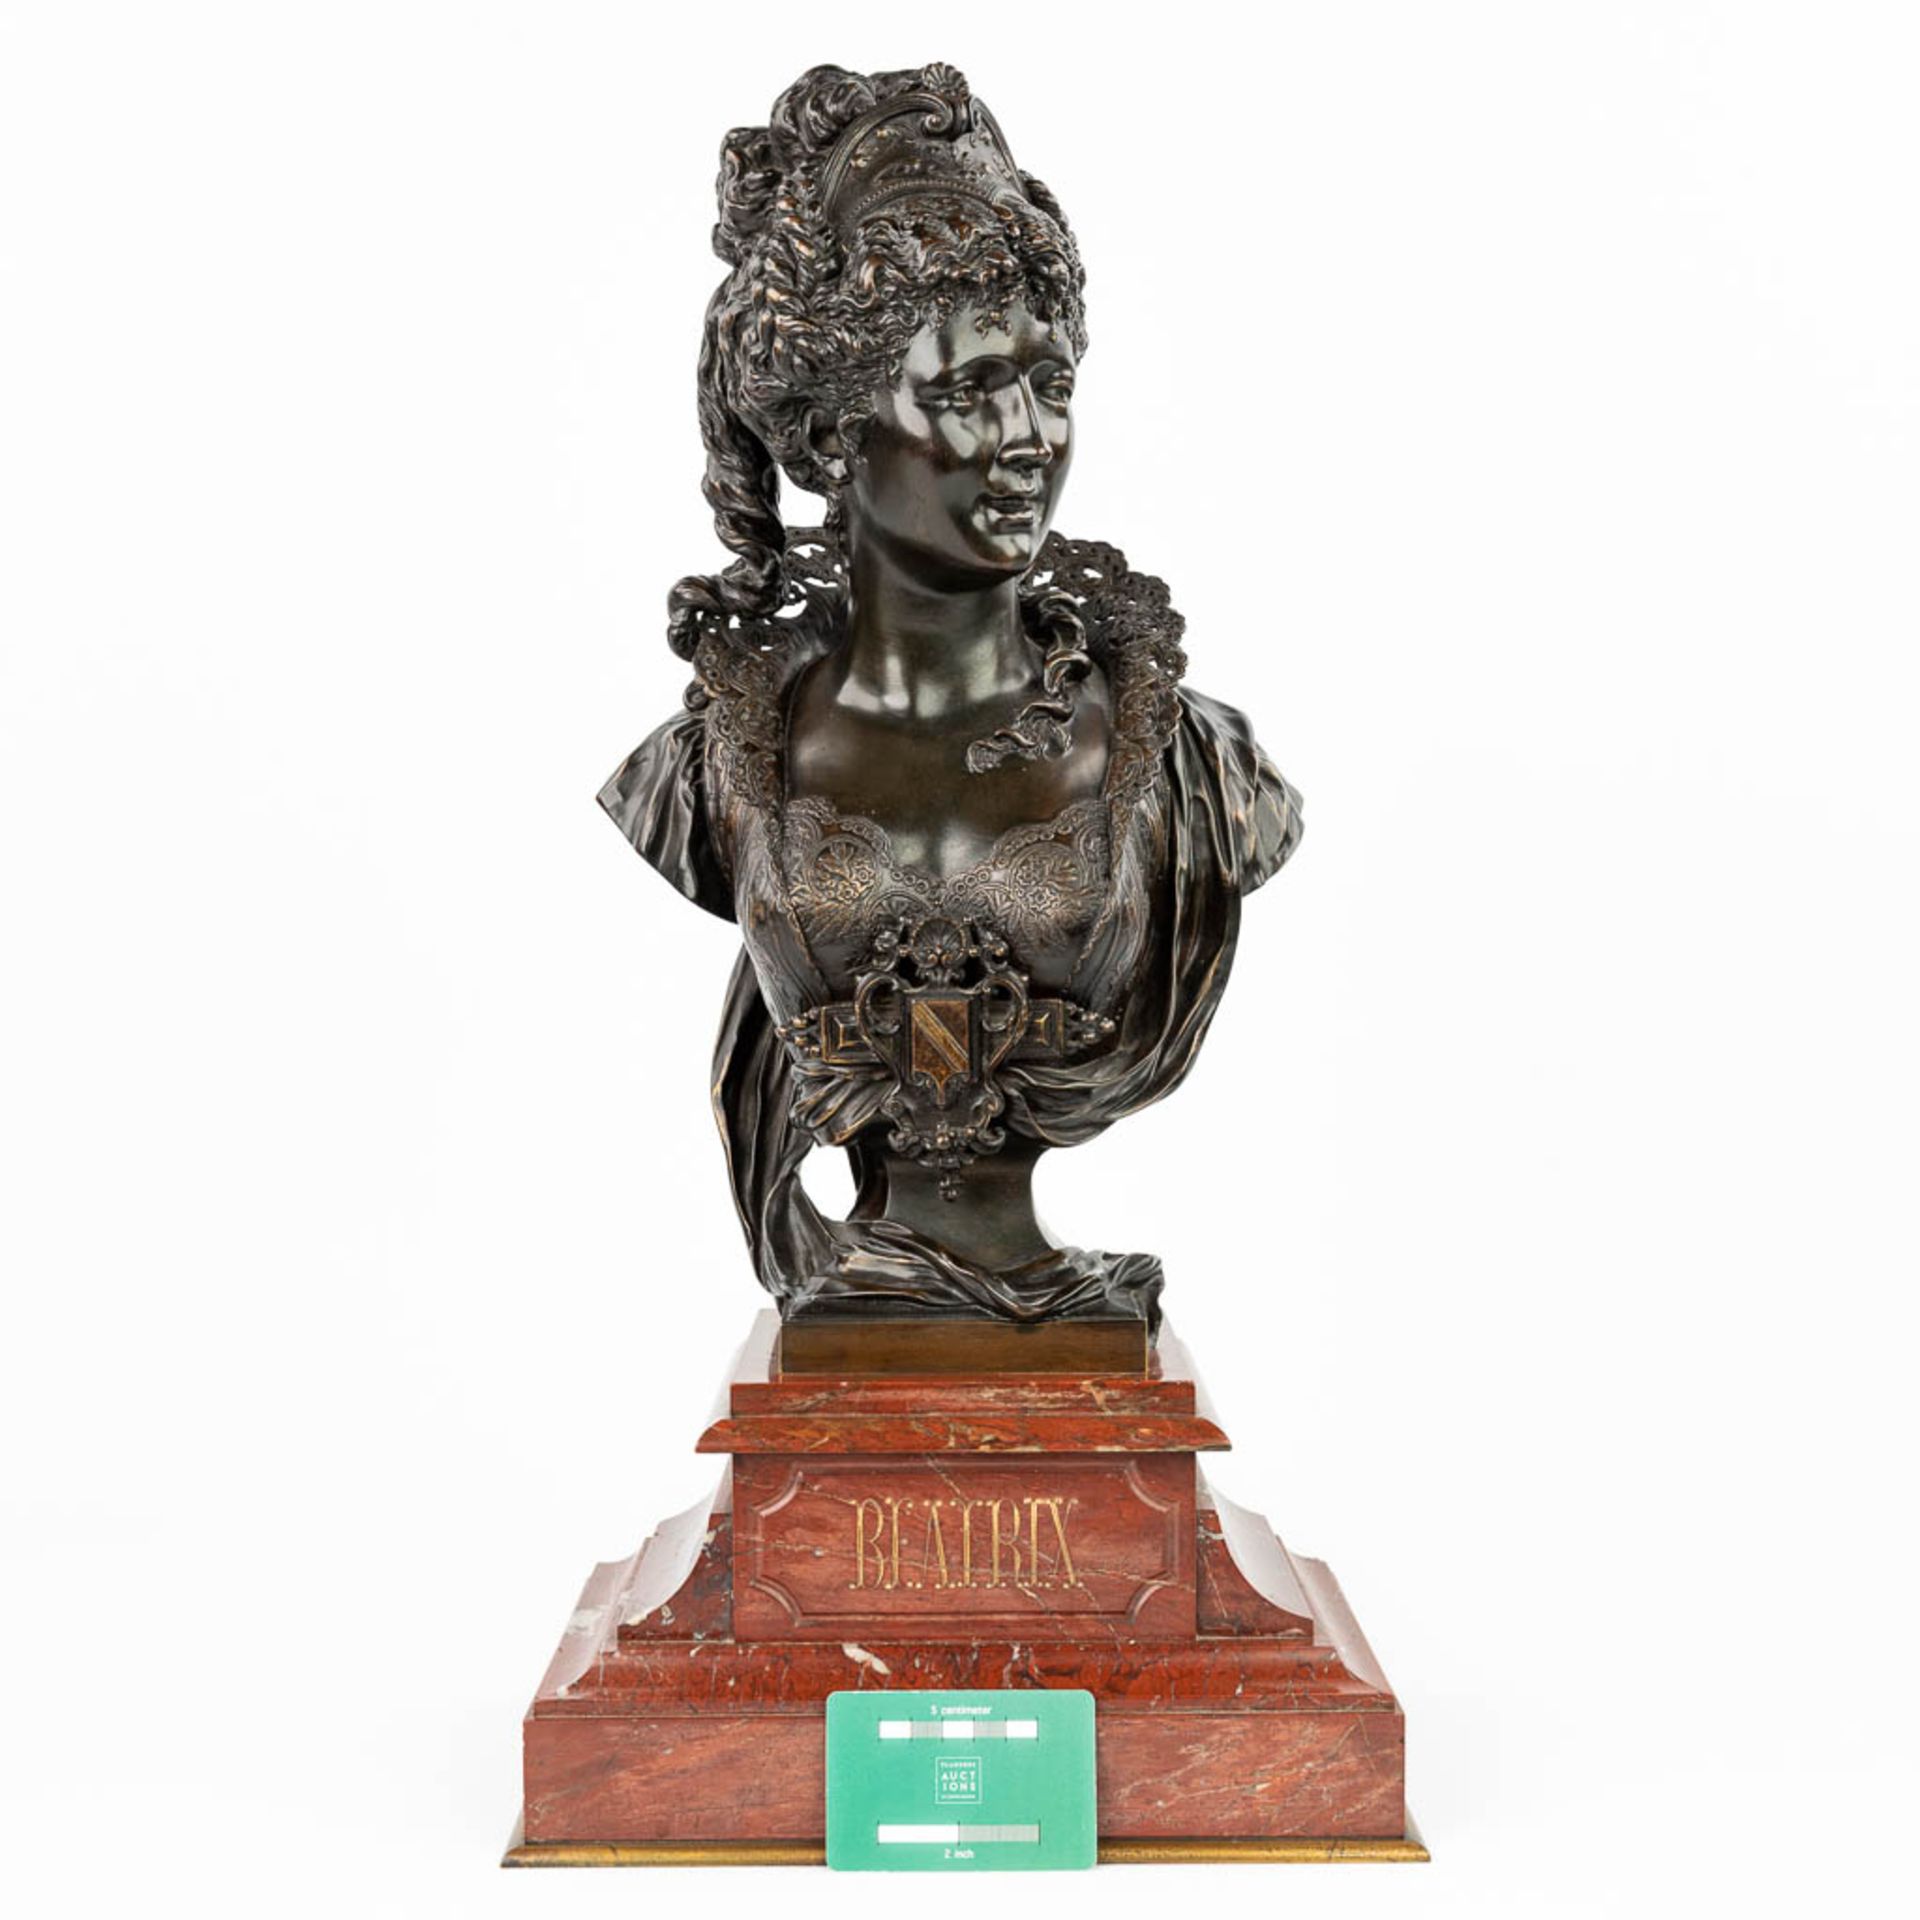 Paul DUBOIS (1829-1905) 'Beatrix' a bronze bust, mounted on a red marble base. (H:59cm) - Image 8 of 11